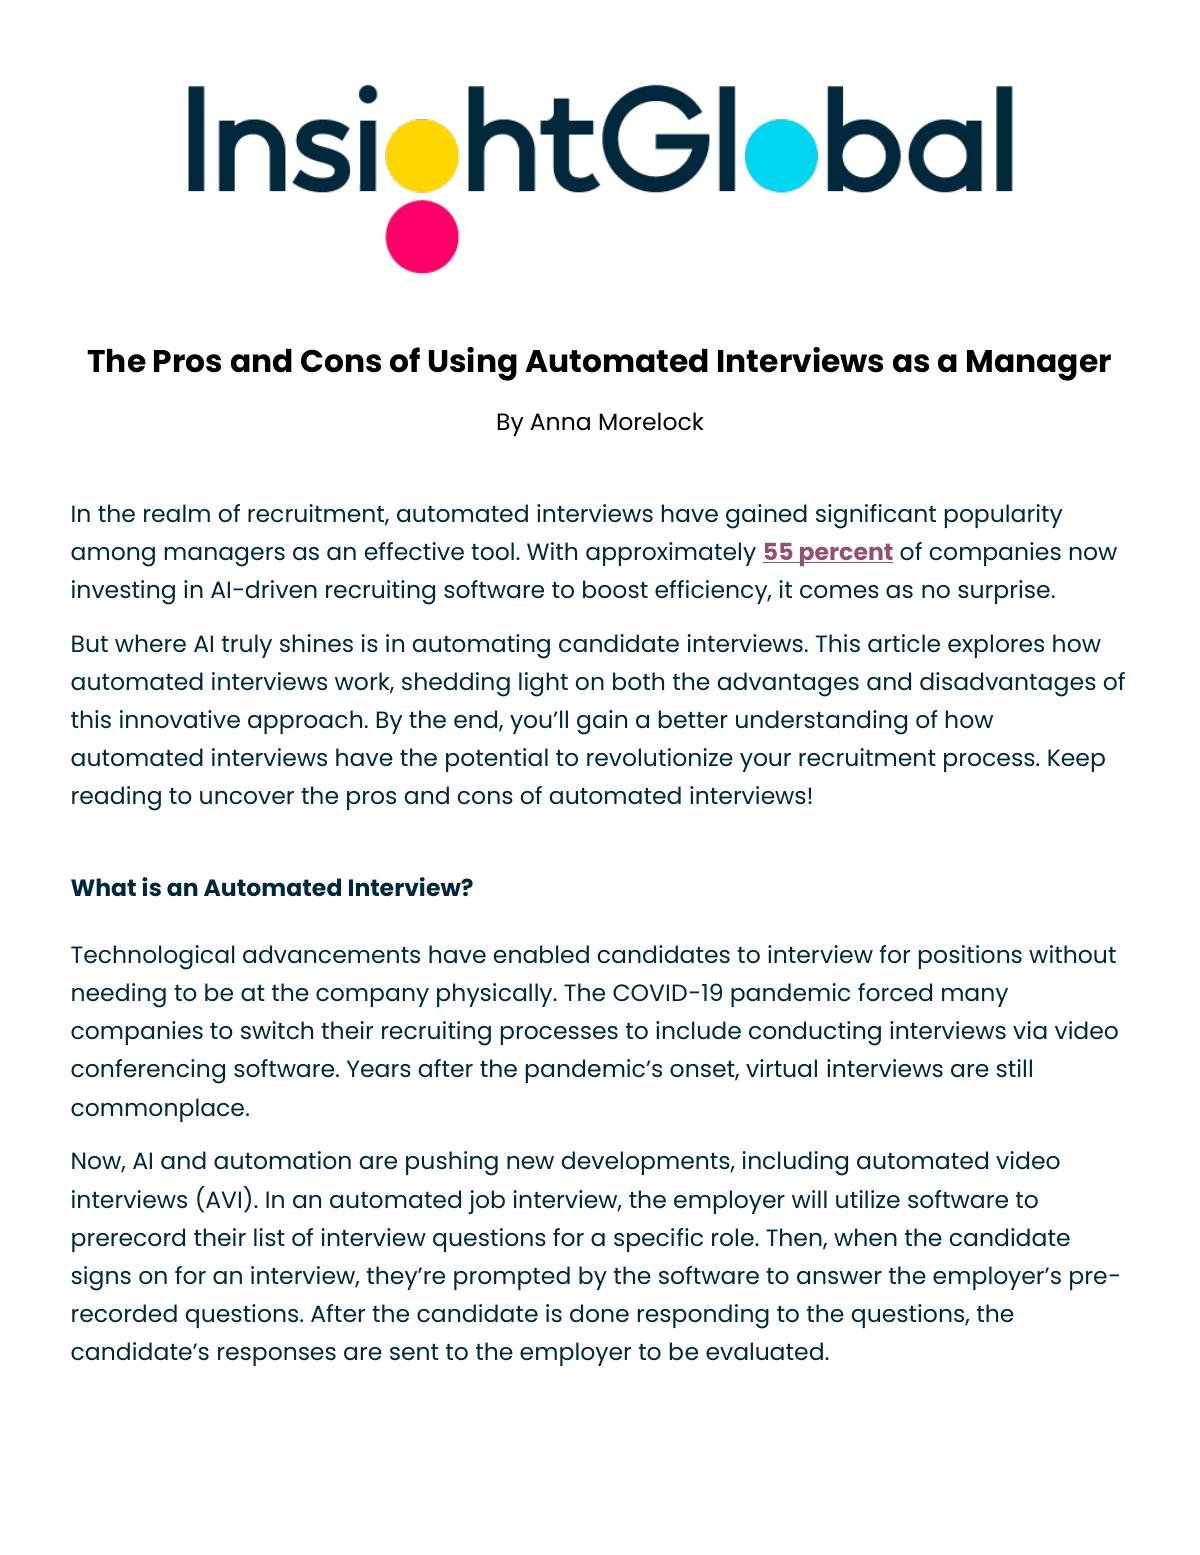 The Pros and Cons of Using Automated Interviews as a Manager